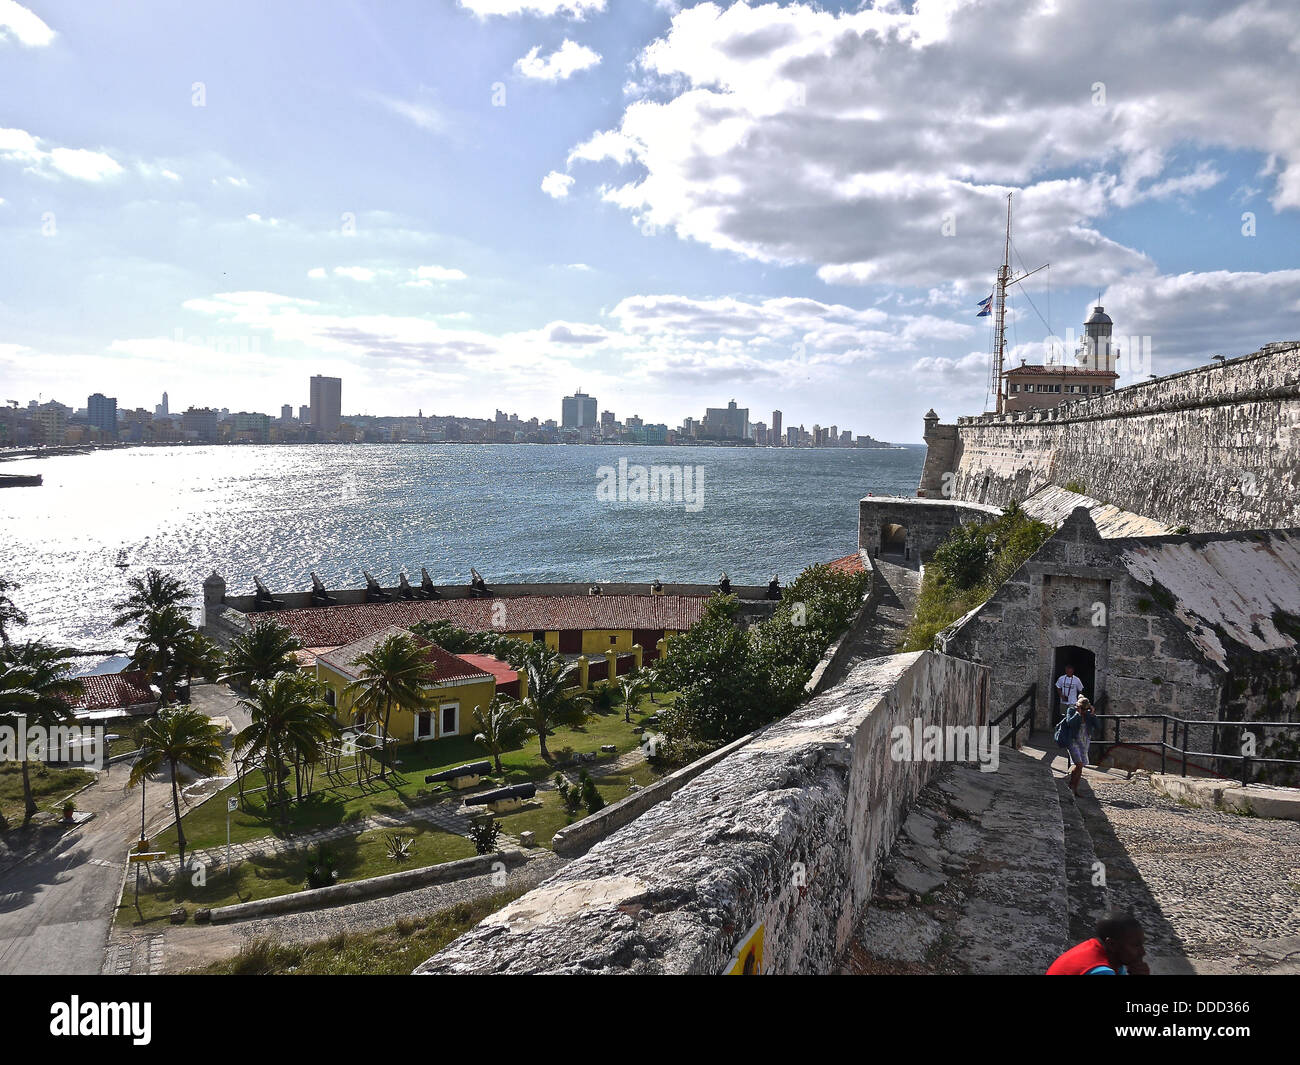 View Of The Spanish Castles Of La Cabana And El Morro Facing The City Of  Havana In Cuba Stock Photo, Picture and Royalty Free Image. Image 27298902.